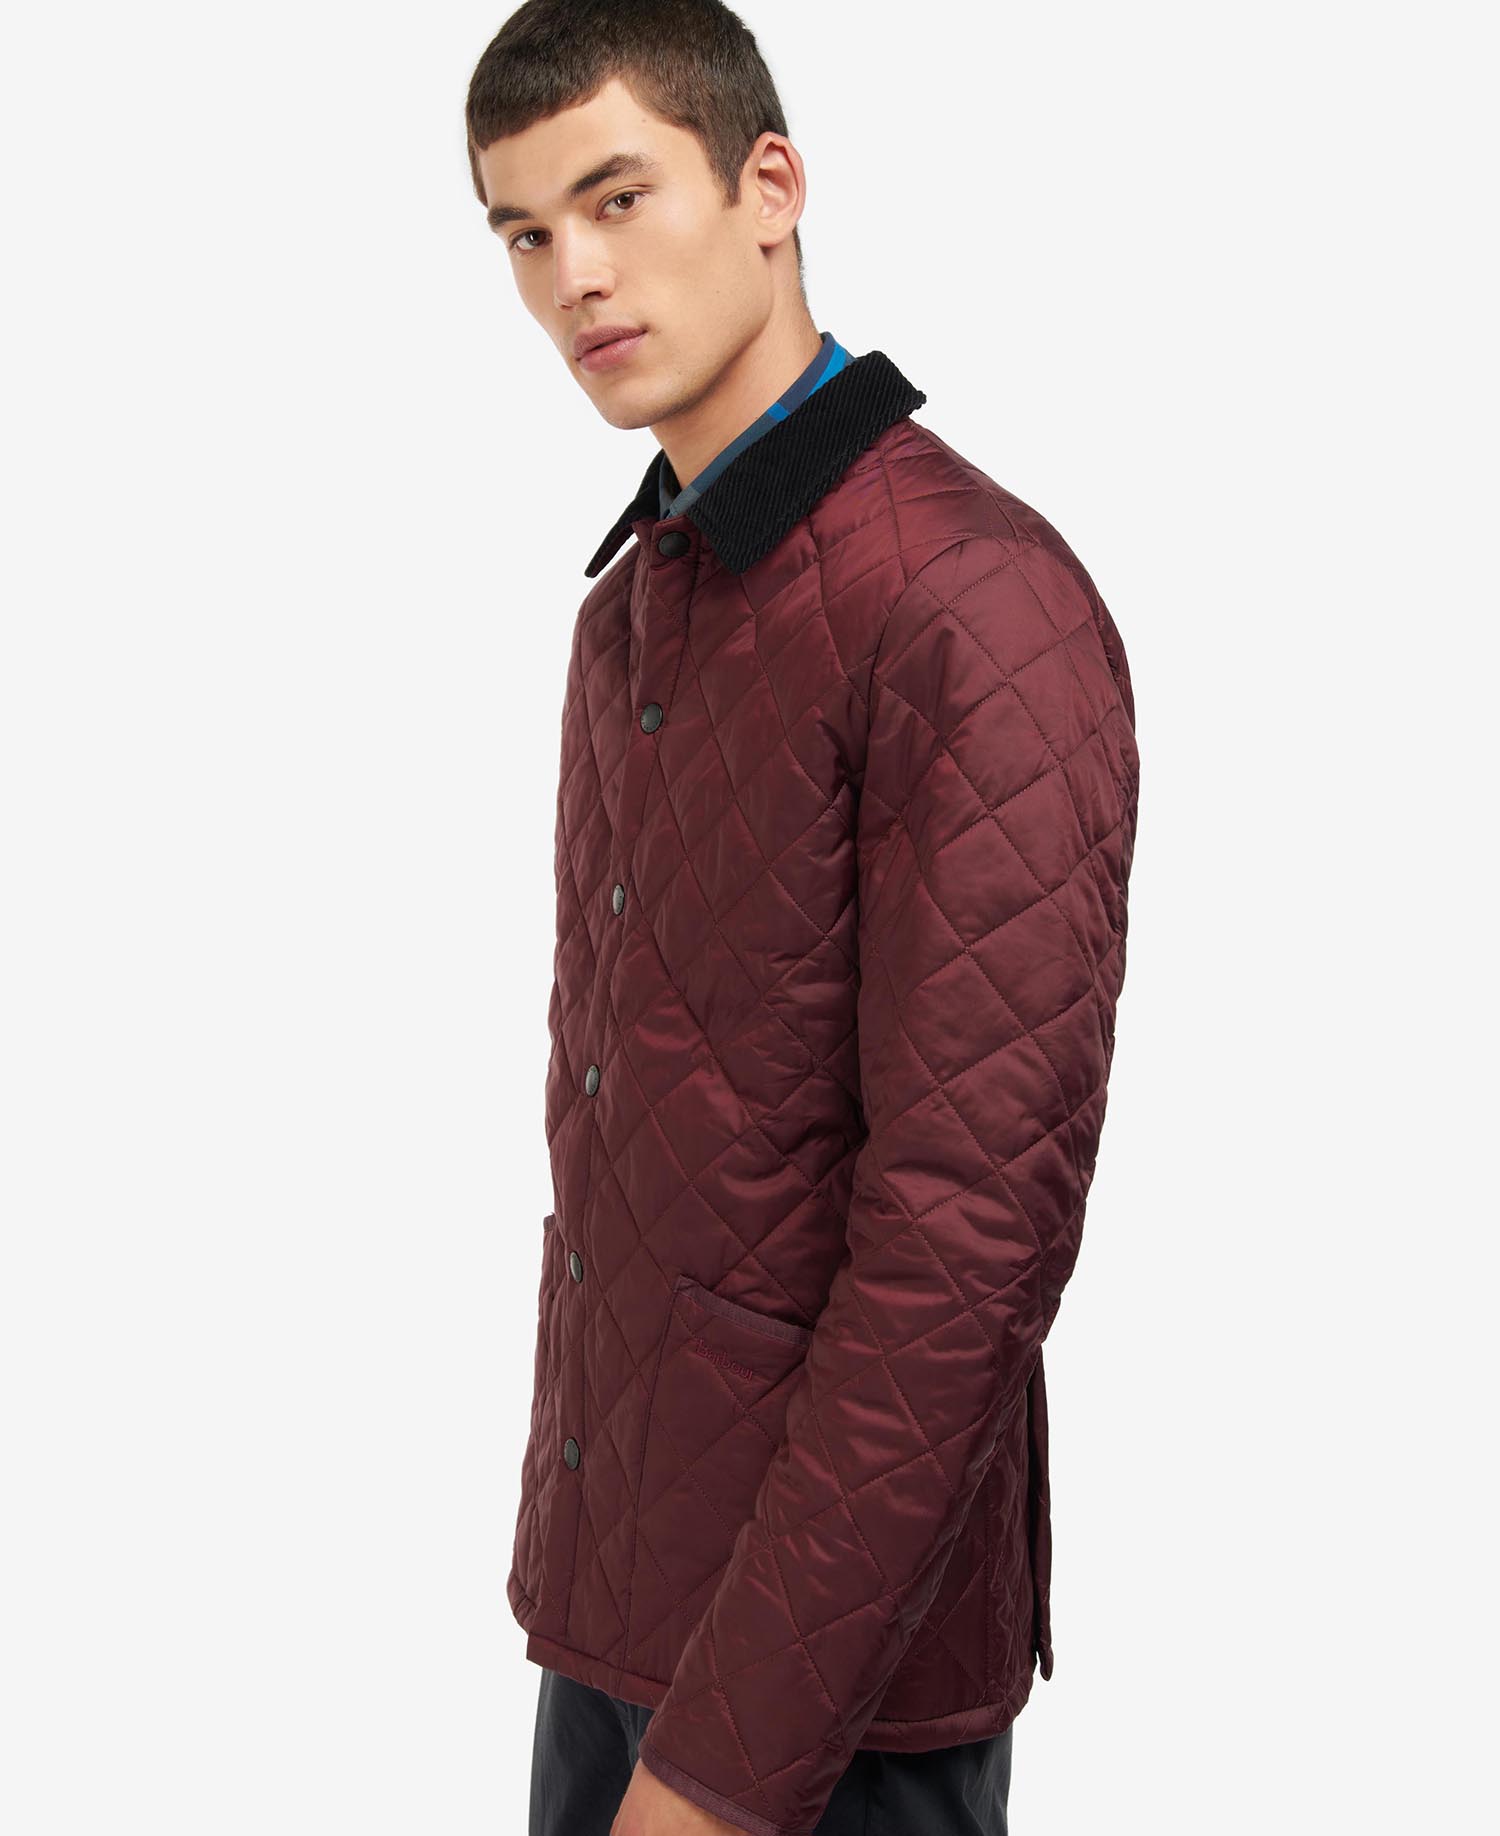 hypothese Zwembad krater Shop the Barbour Heritage Liddesdale Quilted Jacket today. | Barbour